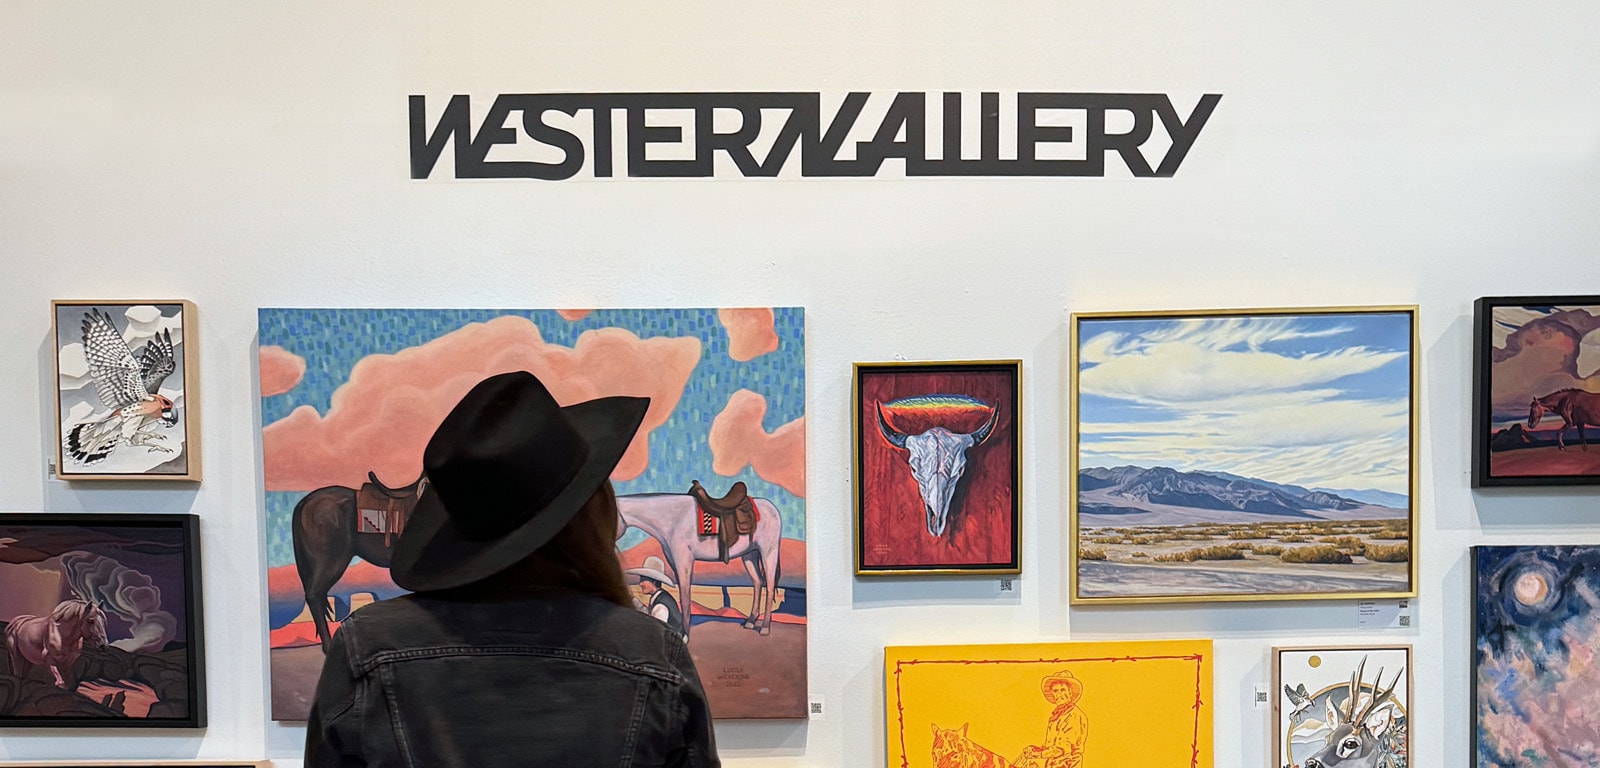 Western Gallery – 24/7 western art gallery representing artists from across the American West